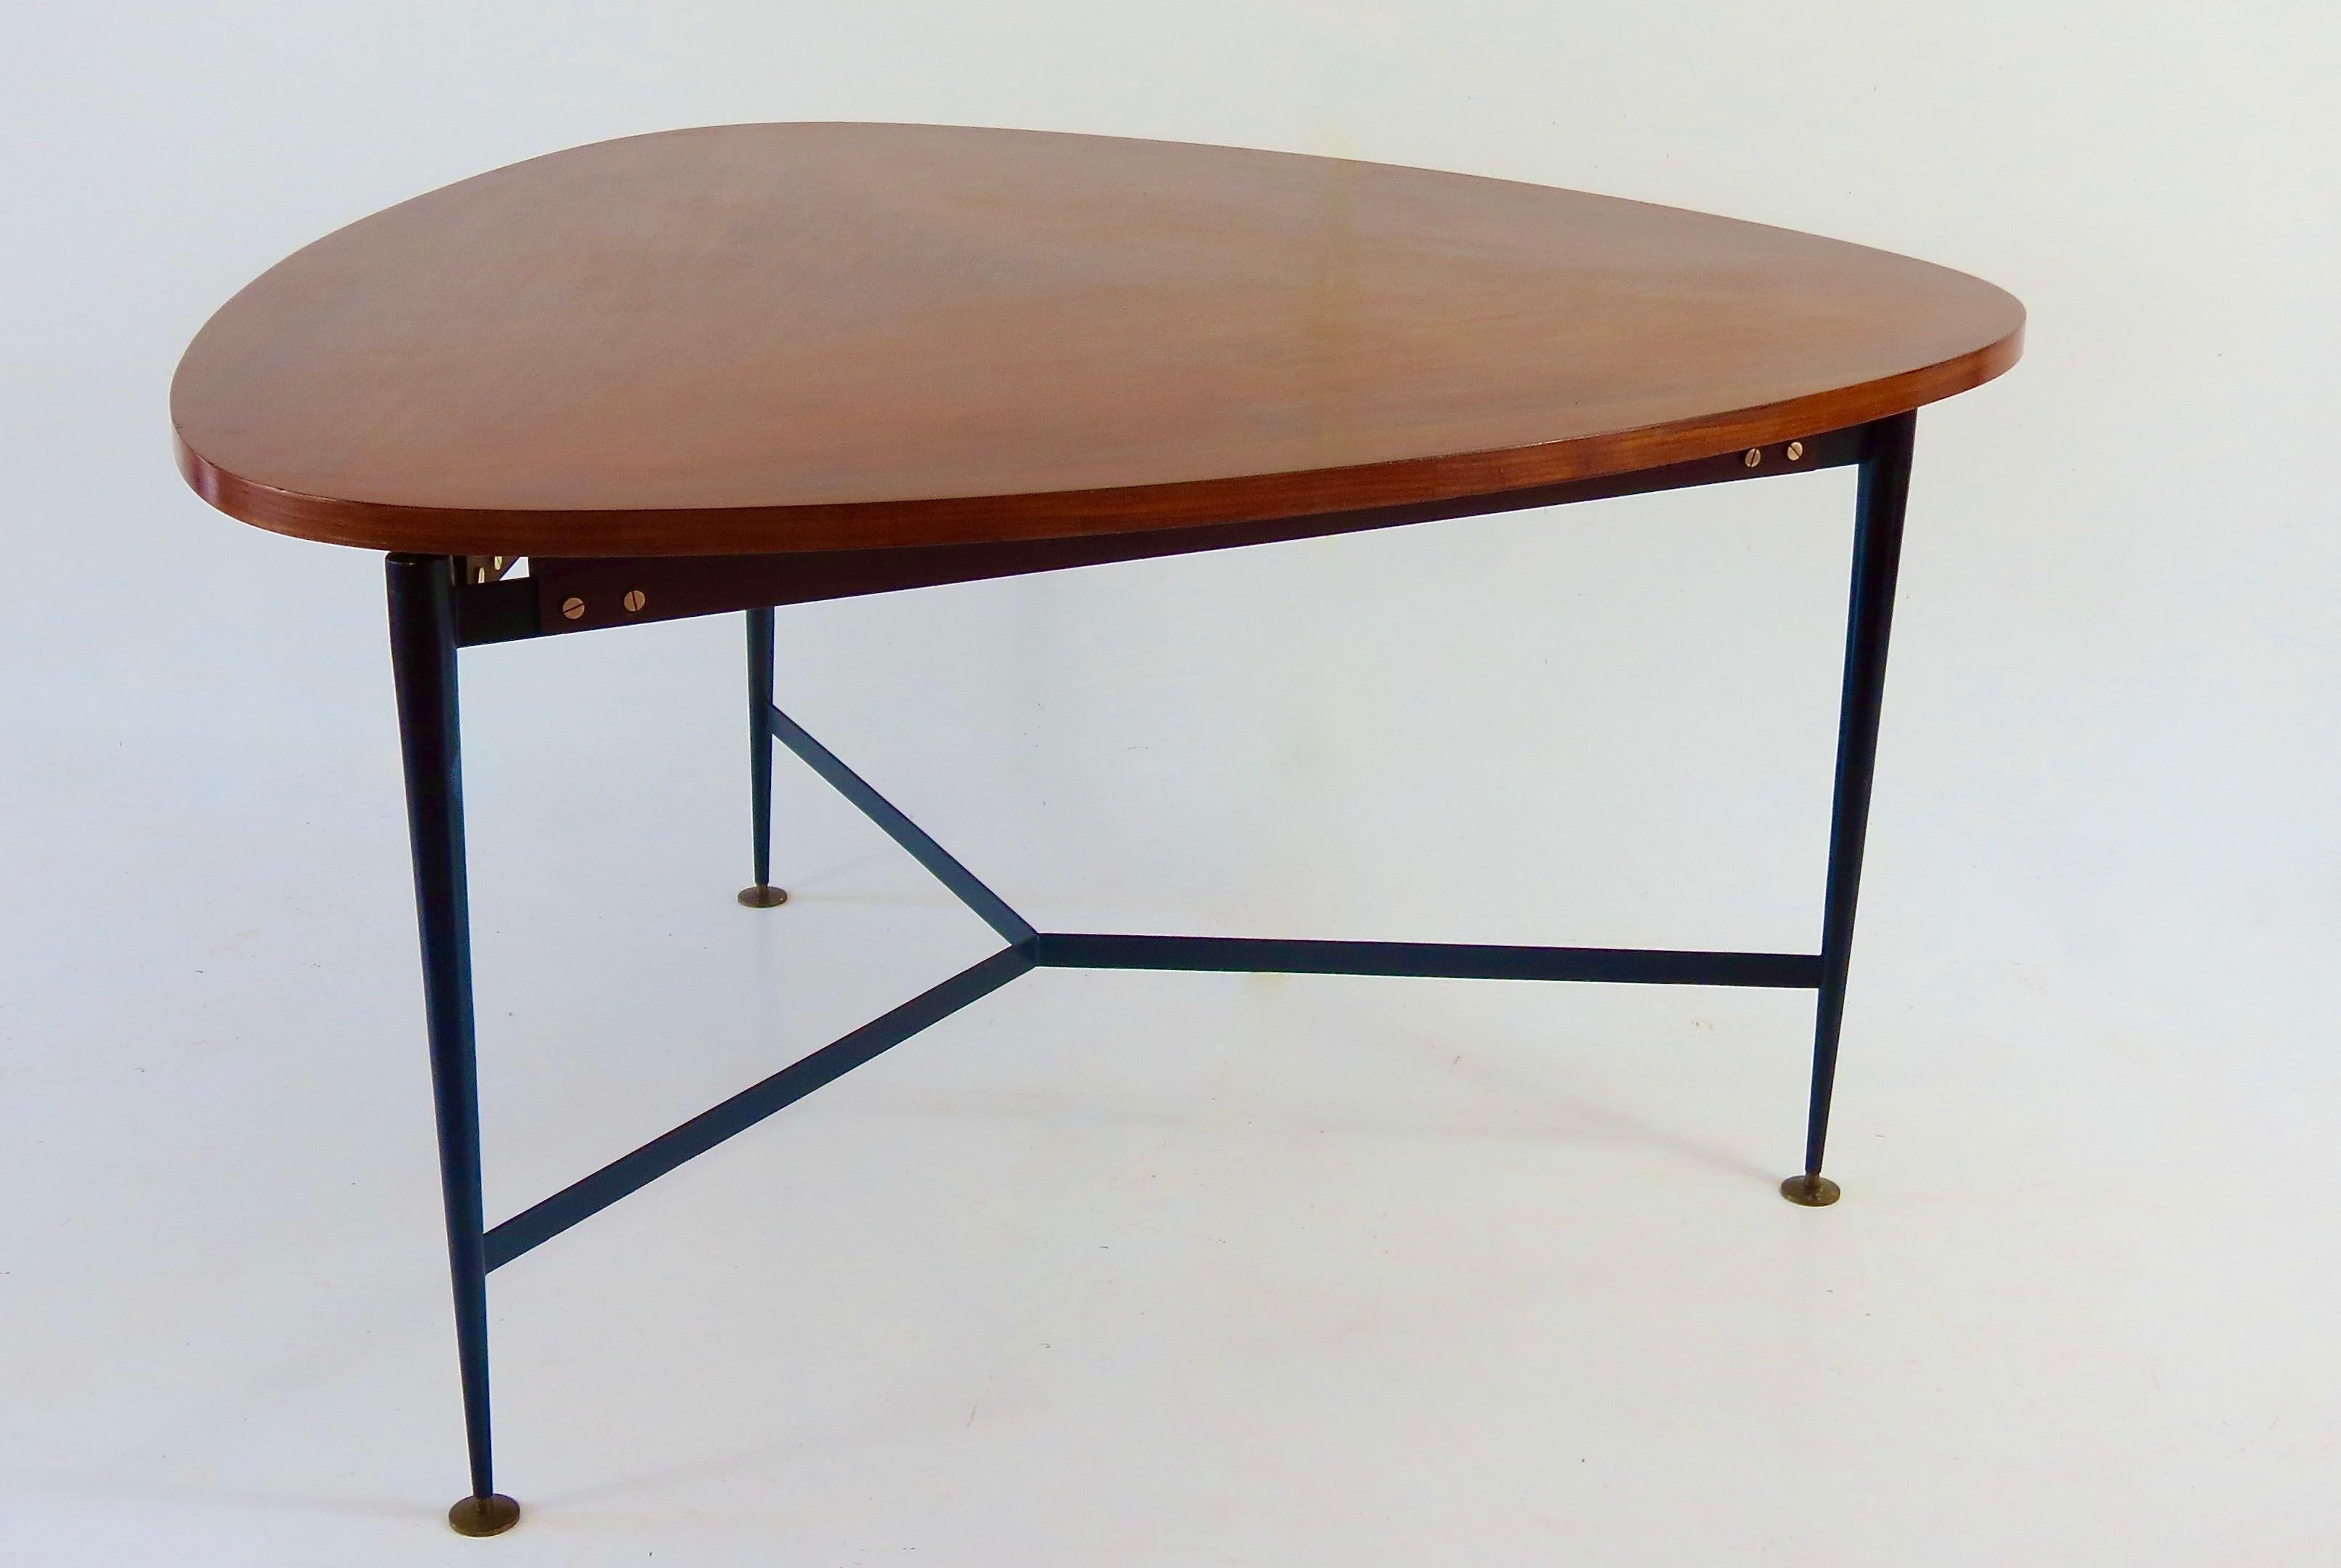 rare large dining or center table by Silvio Cavatorta circa 1950 
three feet and triangular top rounded on the sides
elegant thick top and fine sunburst veneer 
beautiful details on the brass screws and feet 
black lacquered iron, teak and brass